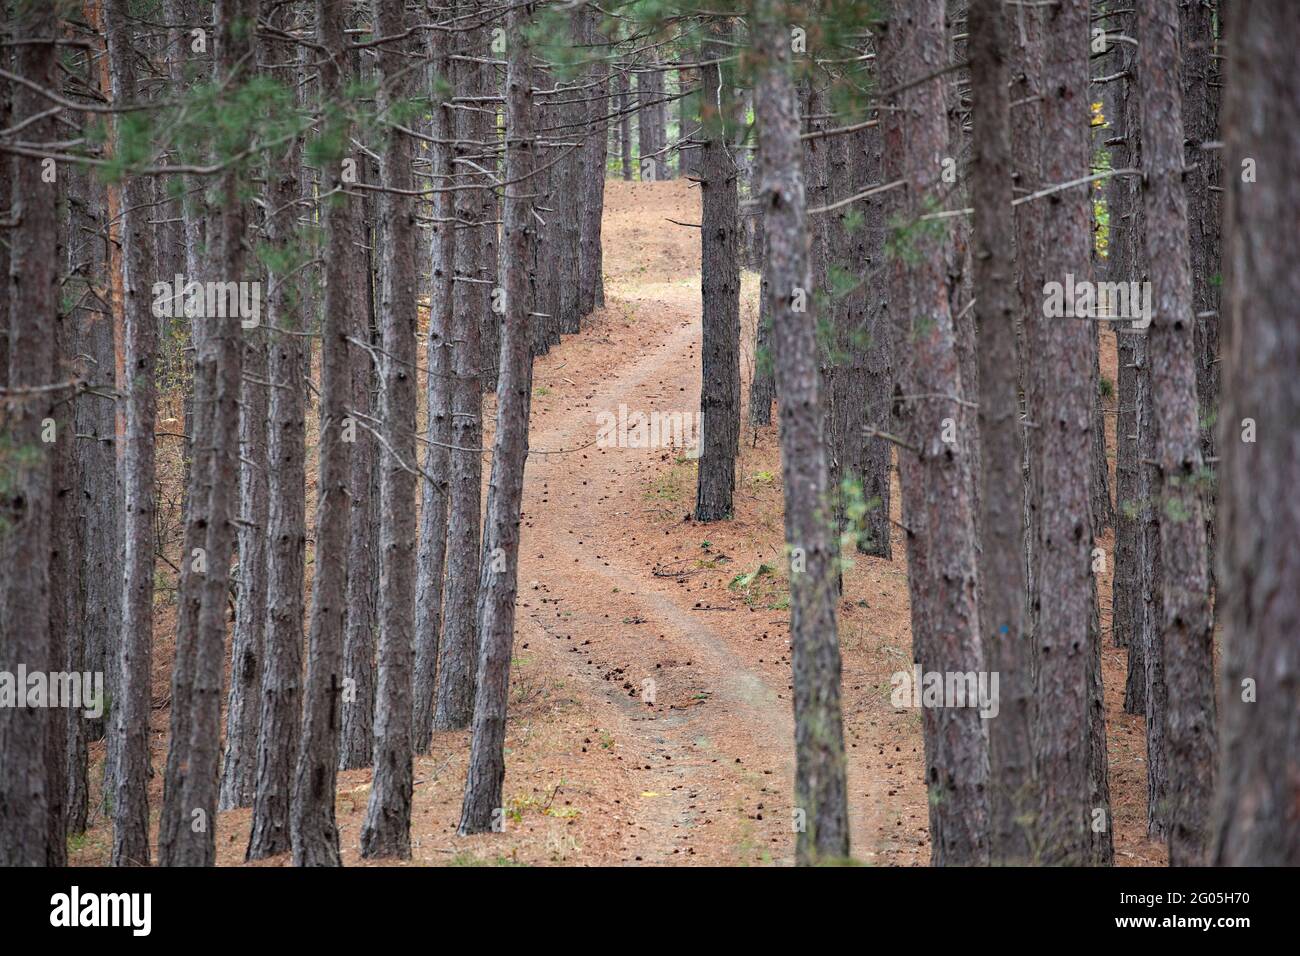 Landscape with winding curvy road path between the trees in a pine forest Stock Photo